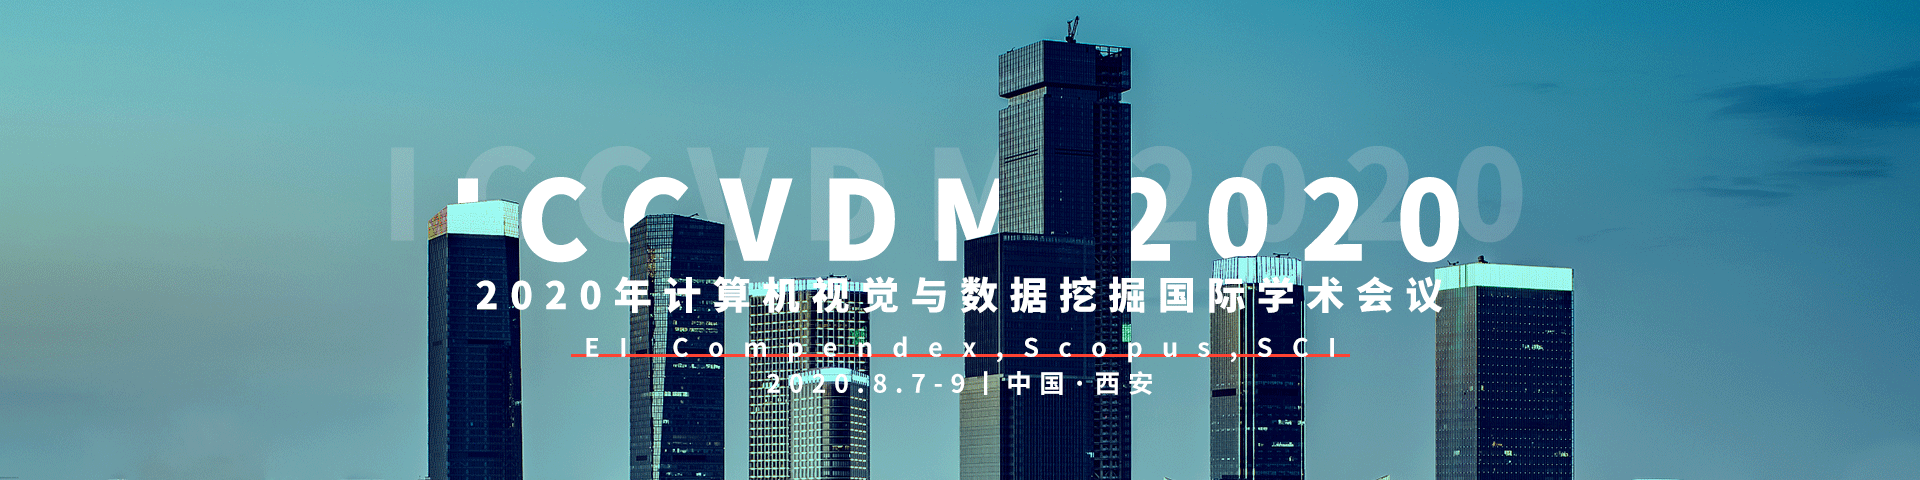 The 2020 International Conference on Computer Vision and Data Mining（ICCVDM 2020）, Xi'an, Shanxi, China